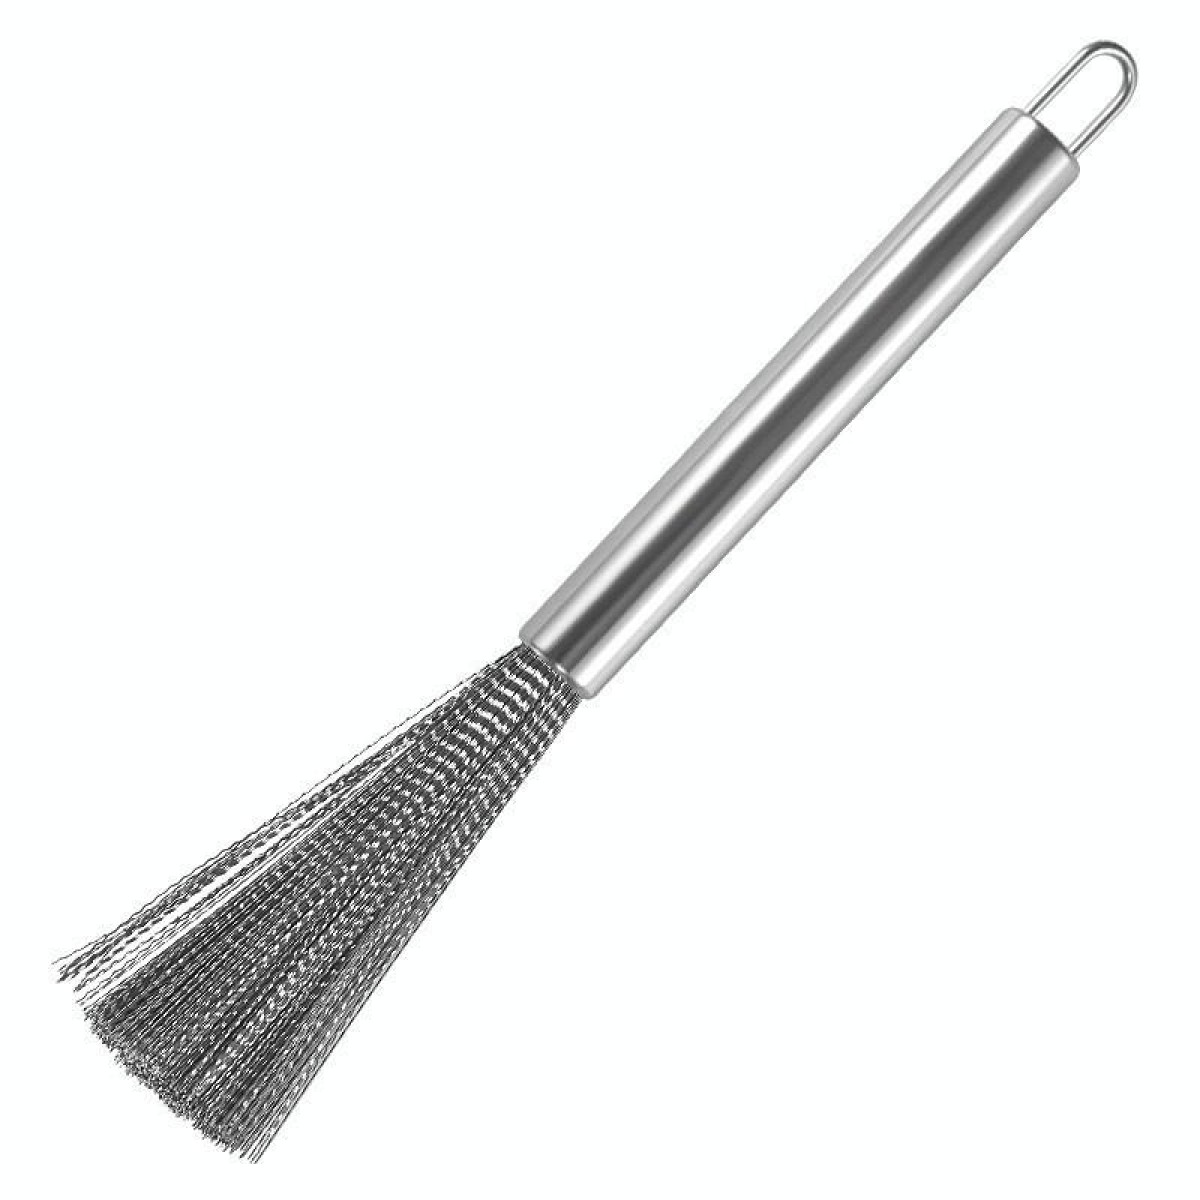 Cookware Scrubber Brush Stainless Steel Cleaning Brush for Pots, Frying Pans, 21cm